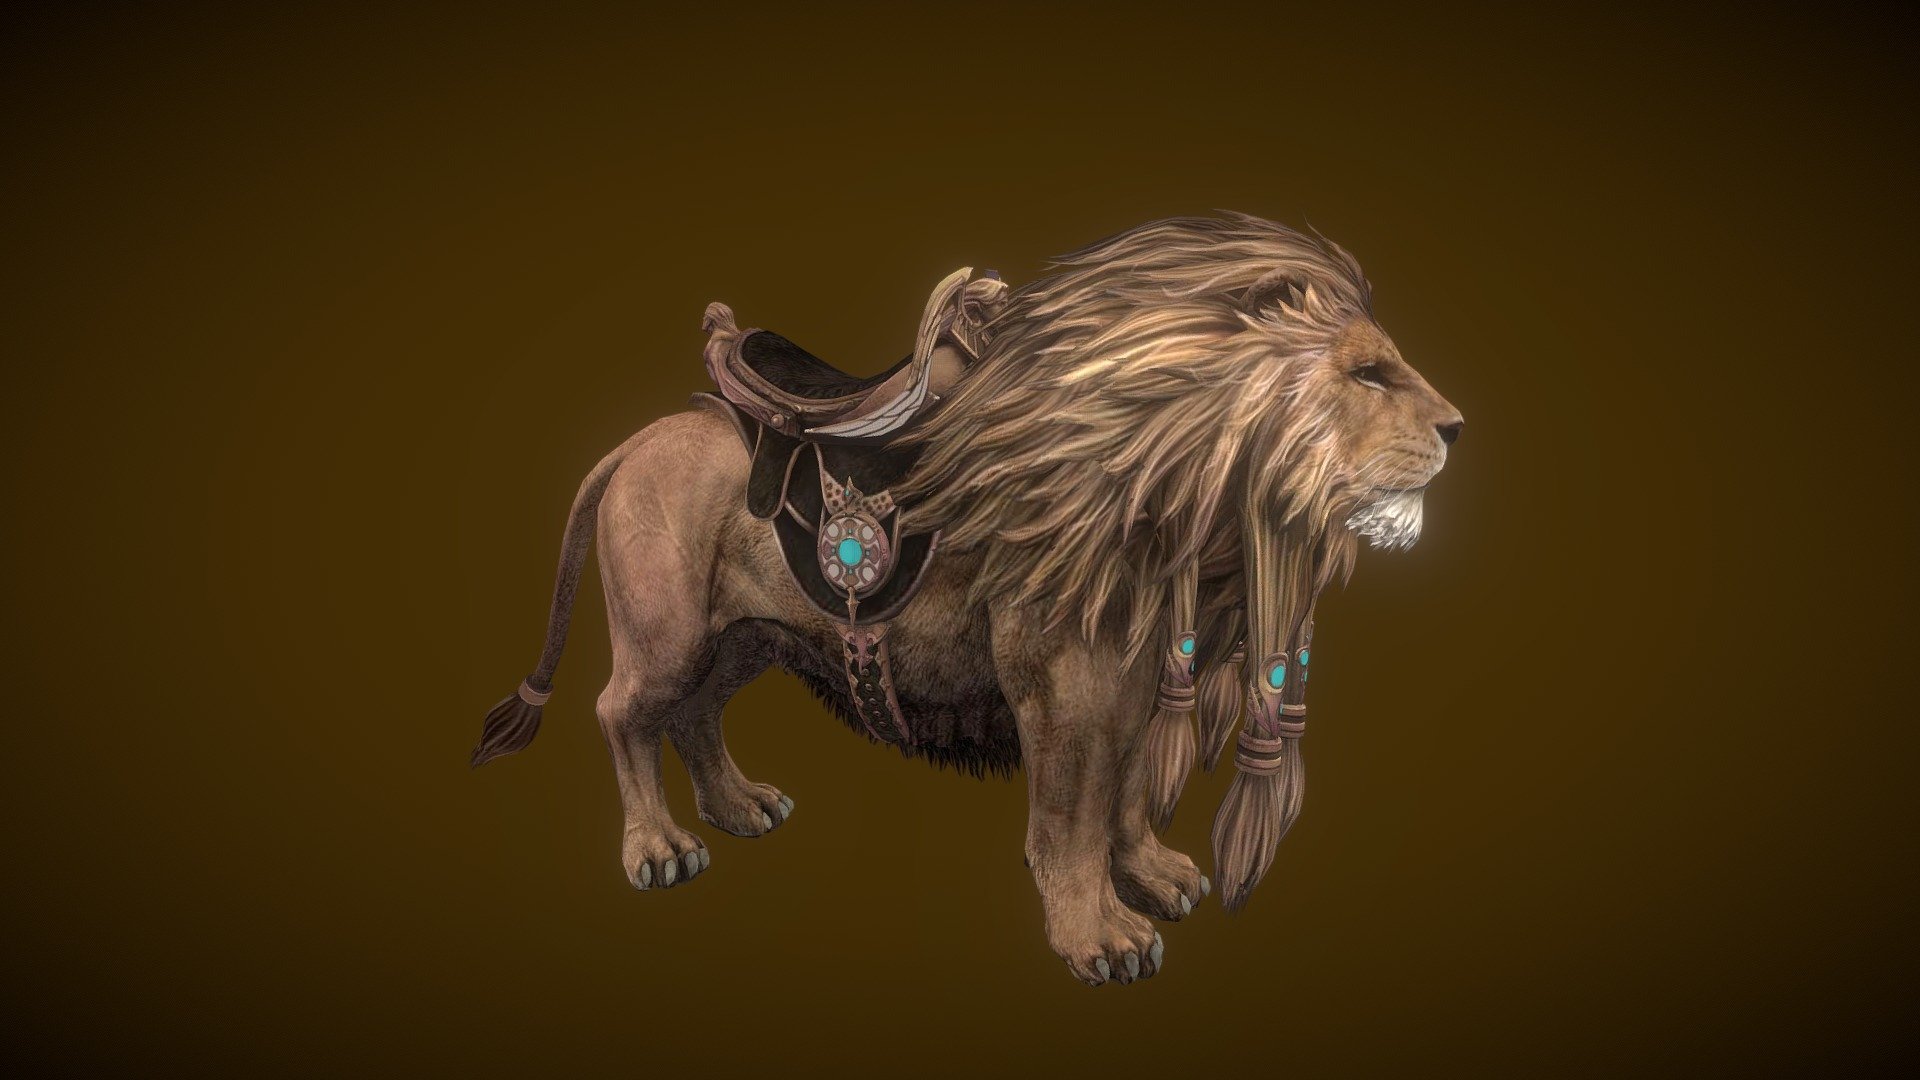 Get this Realistic Lion 3d Model With Animation Files on here- https://deep3dsea.com/downloads/realistic-lion-3d-model-with-animation-files/

Realistic Lion 3d Model With Animation Files

Animation Included:

Idle

Idle_2

Roar

Run

Compatible For :

Unreal Engine

Unity

3d Animation

Get this Realistic Lion 3d Model With Animation Files on here- https://deep3dsea.com/downloads/realistic-lion-3d-model-with-animation-files/

Contact me For Any queries or help -MaryCTalamantez@gmail.com

Thanks &amp; Regards - Realistic Lion 3d Model With Animation Files - 3D model by GameXspot (@3dgamingstudio) 3d model